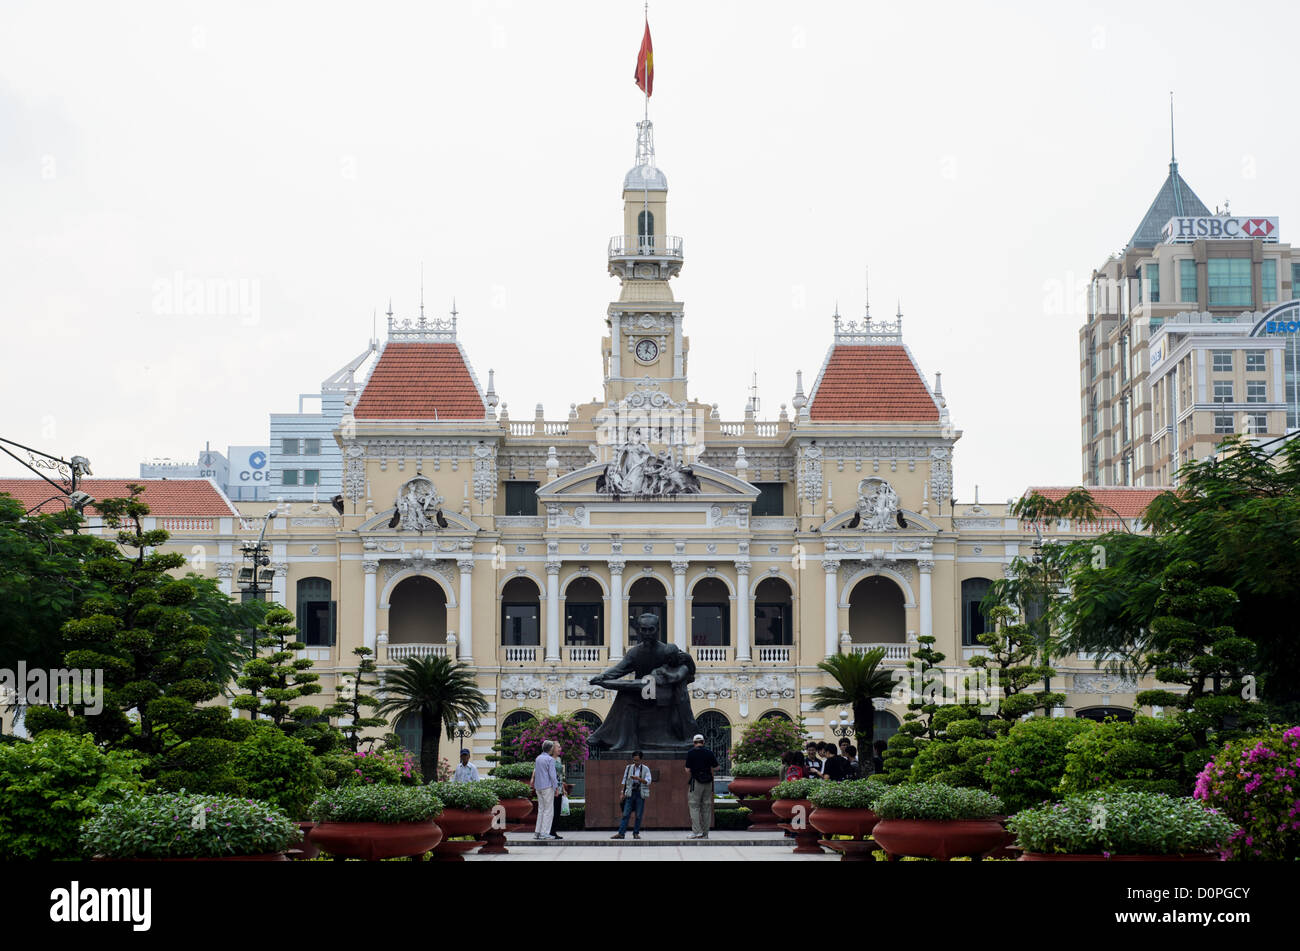 HO CHI MINH CITY, Vietnam - Ho Chi Minh City Hall during the day. It was built in the early 20th Century by the French colonial government as Saigon's city hall. It's also known as Ho Chi Minh City People's Committee Head office, in French as Hôtel de Ville de Saigon, and in Vietnamese as Trụ sở Ủy ban Nhân dân Thành phố Hồ Chí Minh. Stock Photo